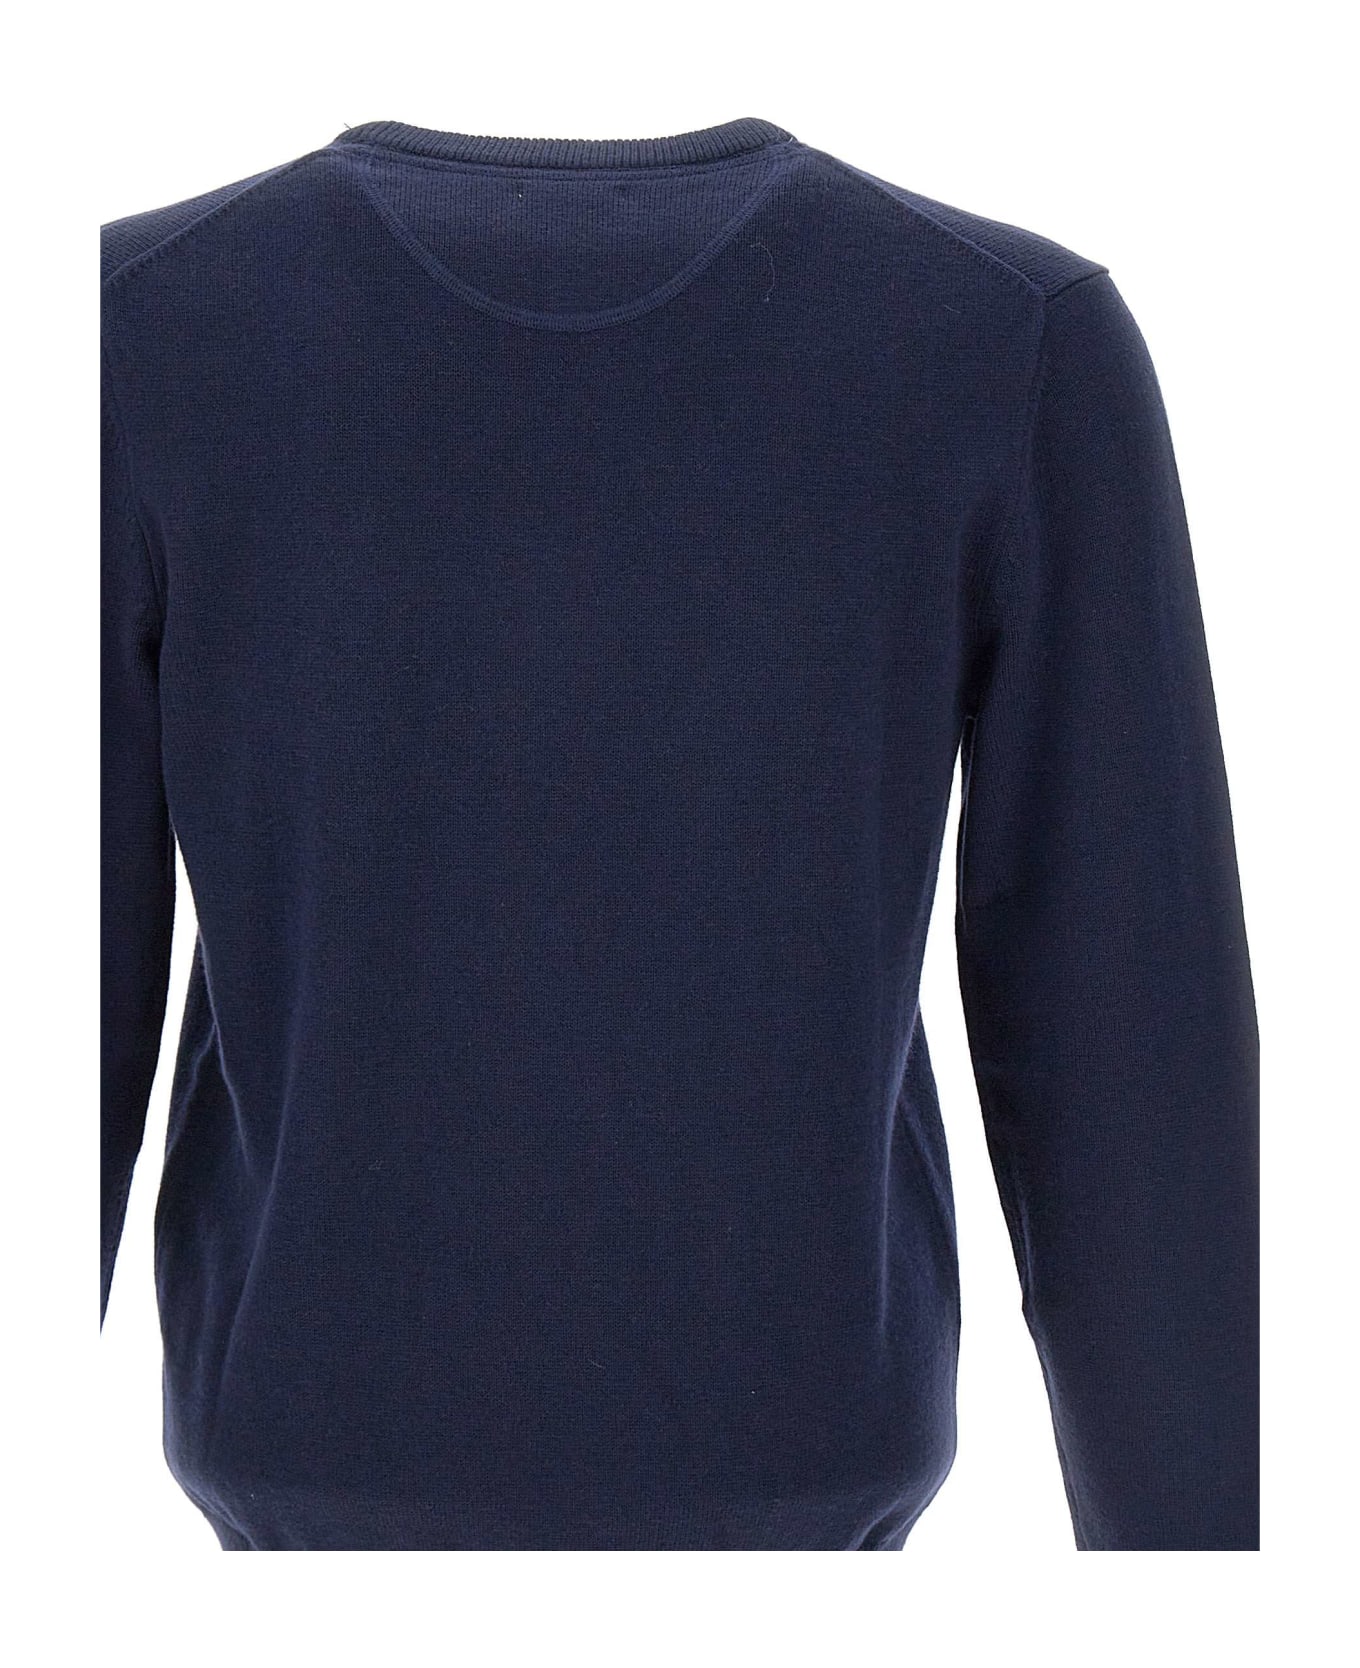 Sun 68 Cotton And Wool Sweater Sweater - NAVY BLUE